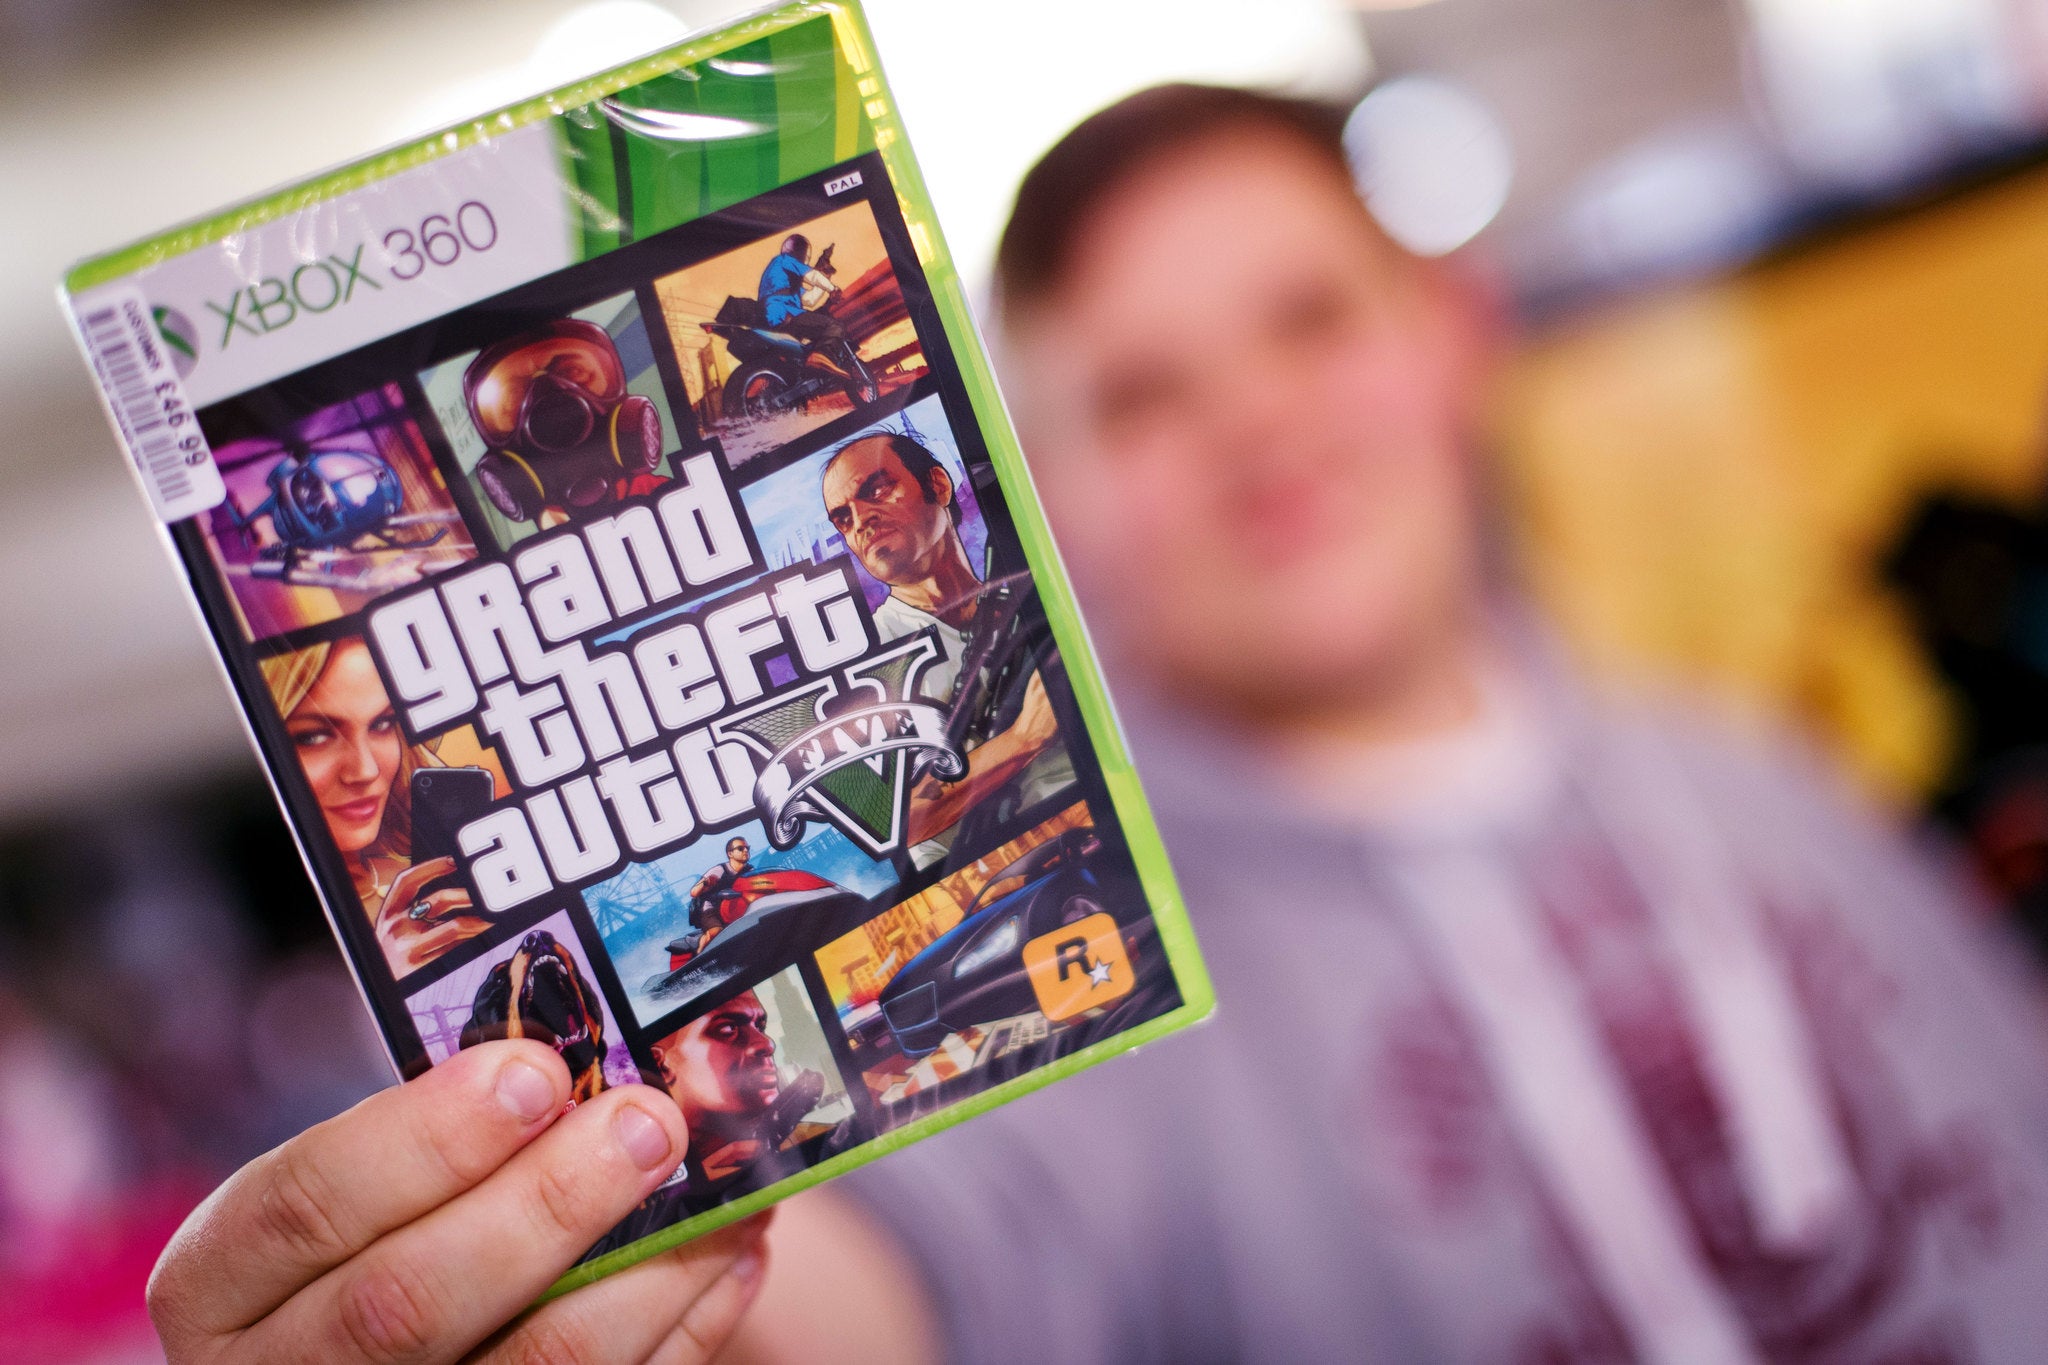 A gamer poses with his copy of the console game Grand Theft Auto 5 at the midnight opening of the 17 September, 2013. GTA V has since become the biggest selling game of 2013, according to its makers.